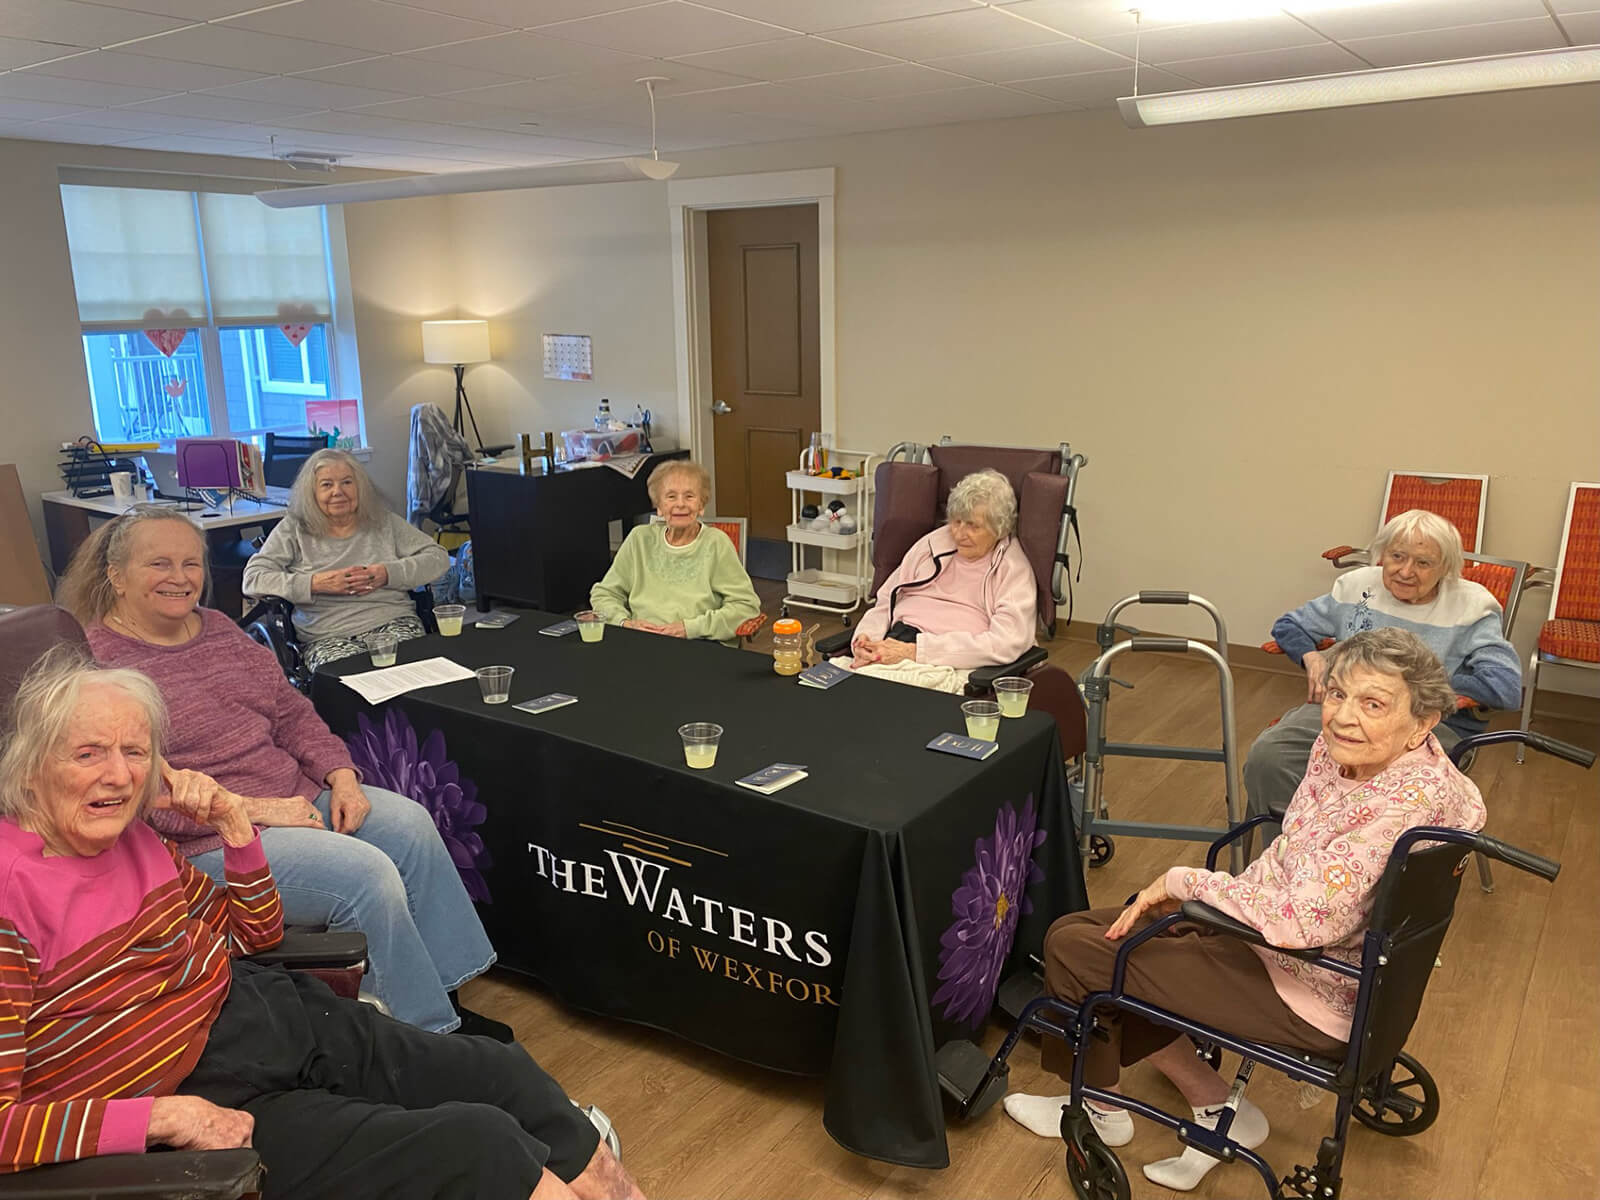 A group of seniors enjoying a social card game at The Waters of Wexford, fostering friendship and leisure.